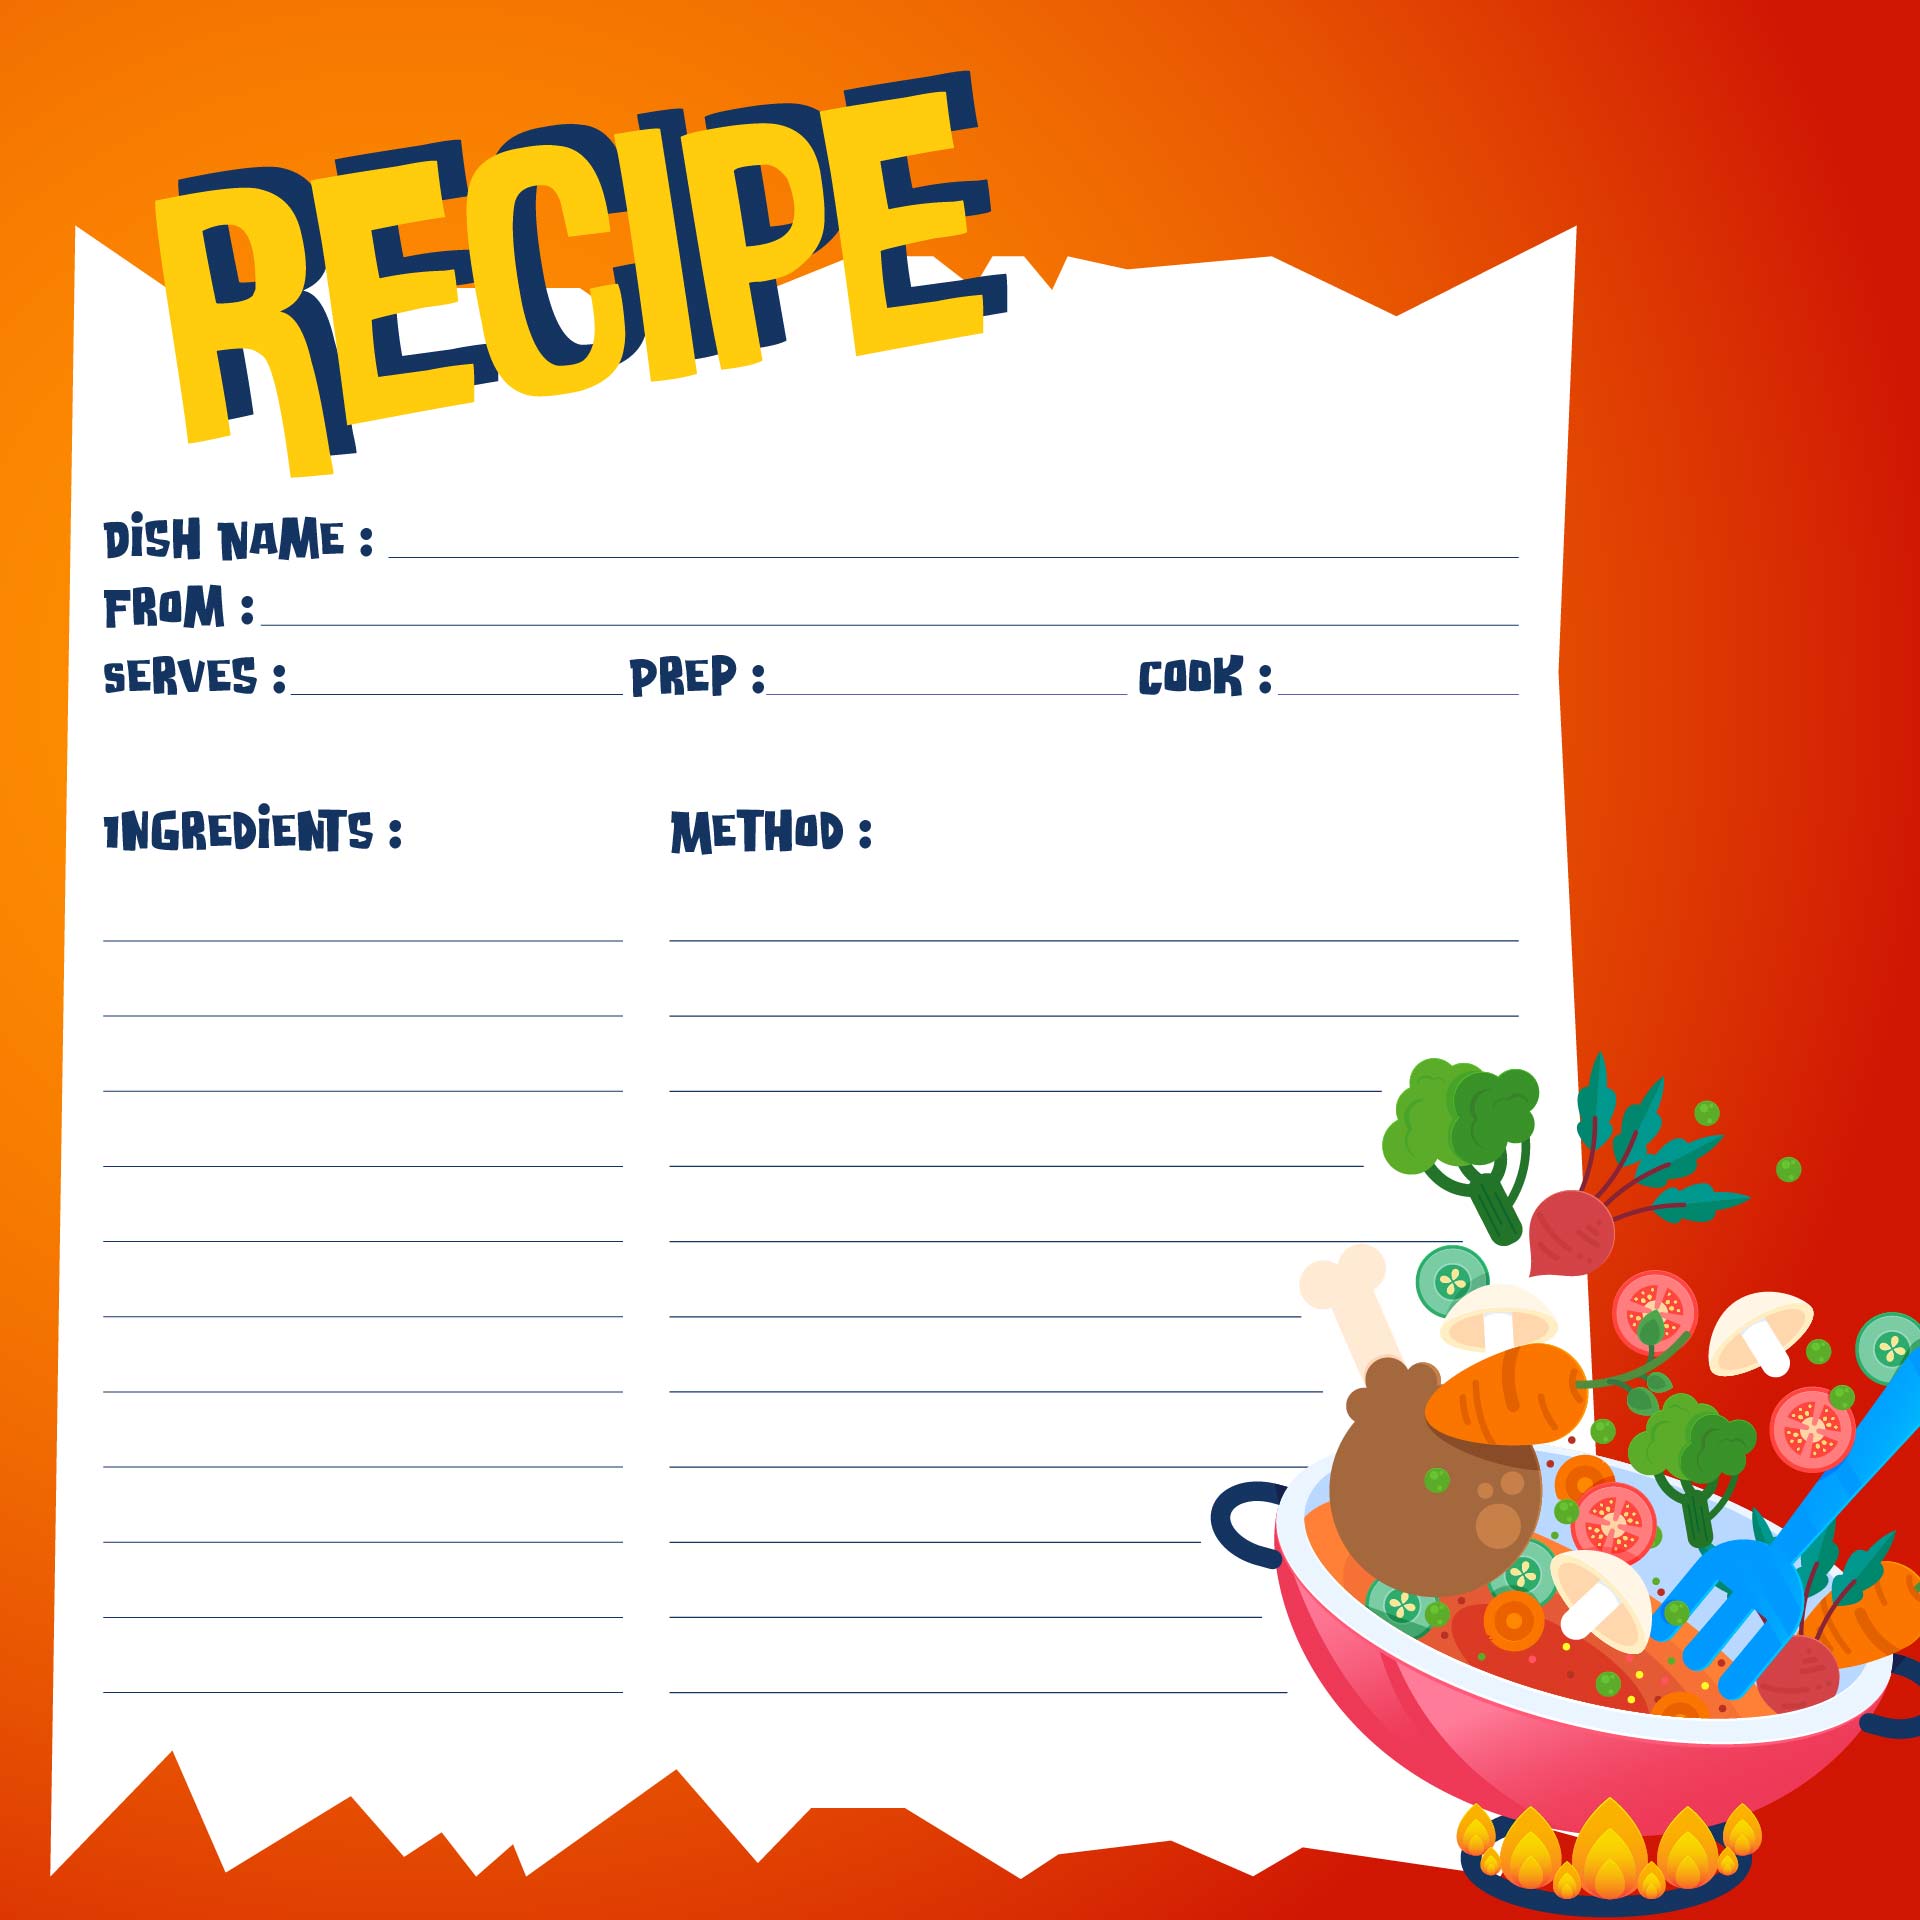 21 Best Free Printable Blank Recipe Pages - printablee.com With Full Page Recipe Template For Word